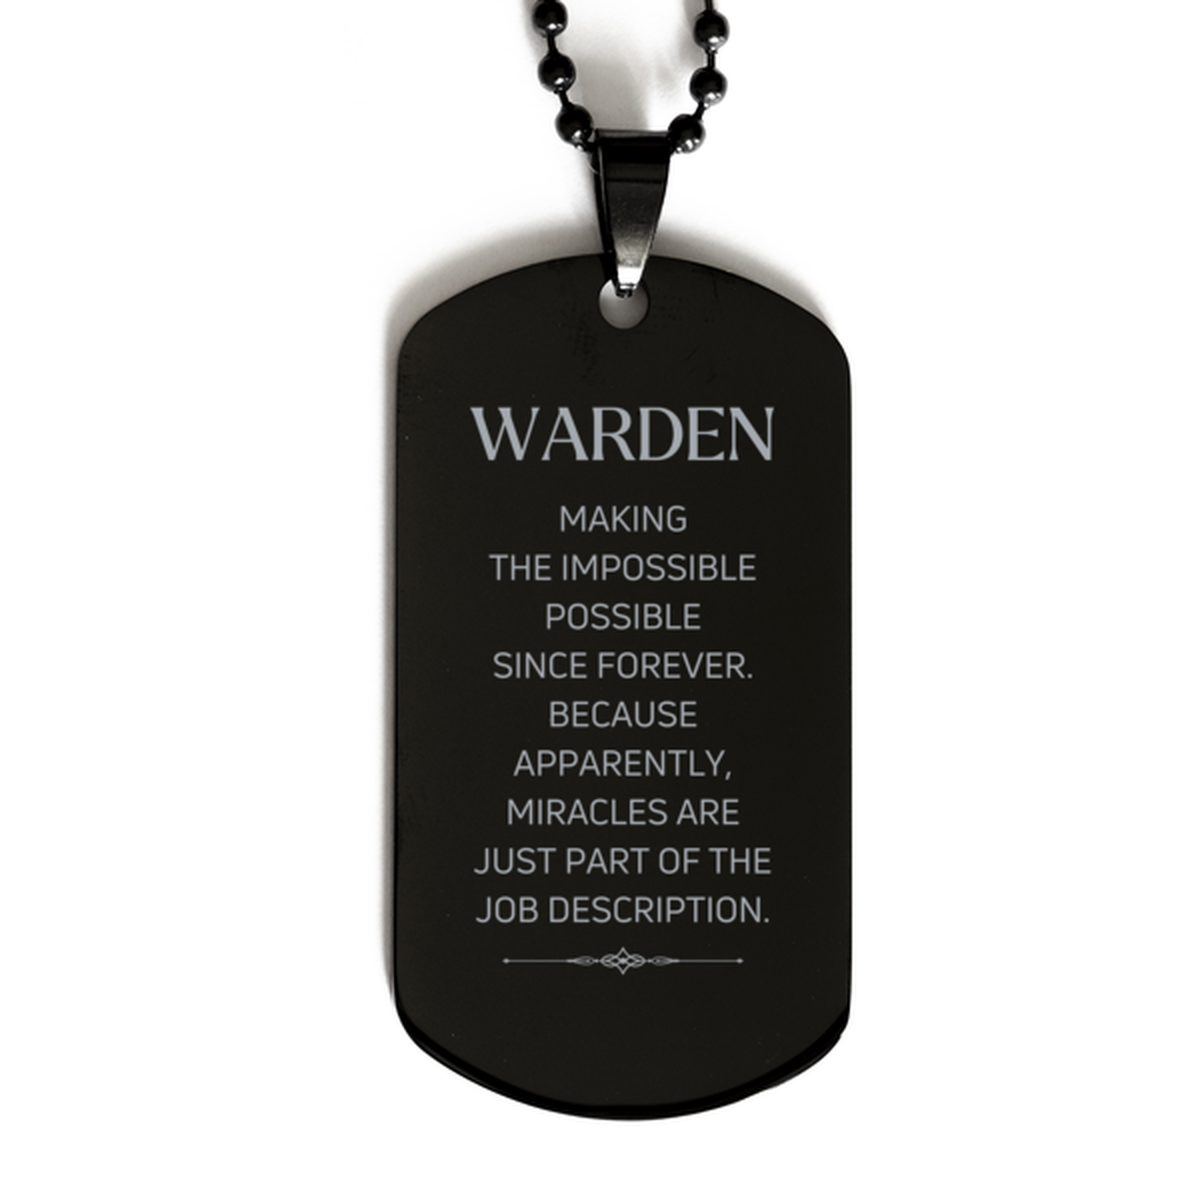 Funny Warden Gifts, Miracles are just part of the job description, Inspirational Birthday Black Dog Tag For Warden, Men, Women, Coworkers, Friends, Boss